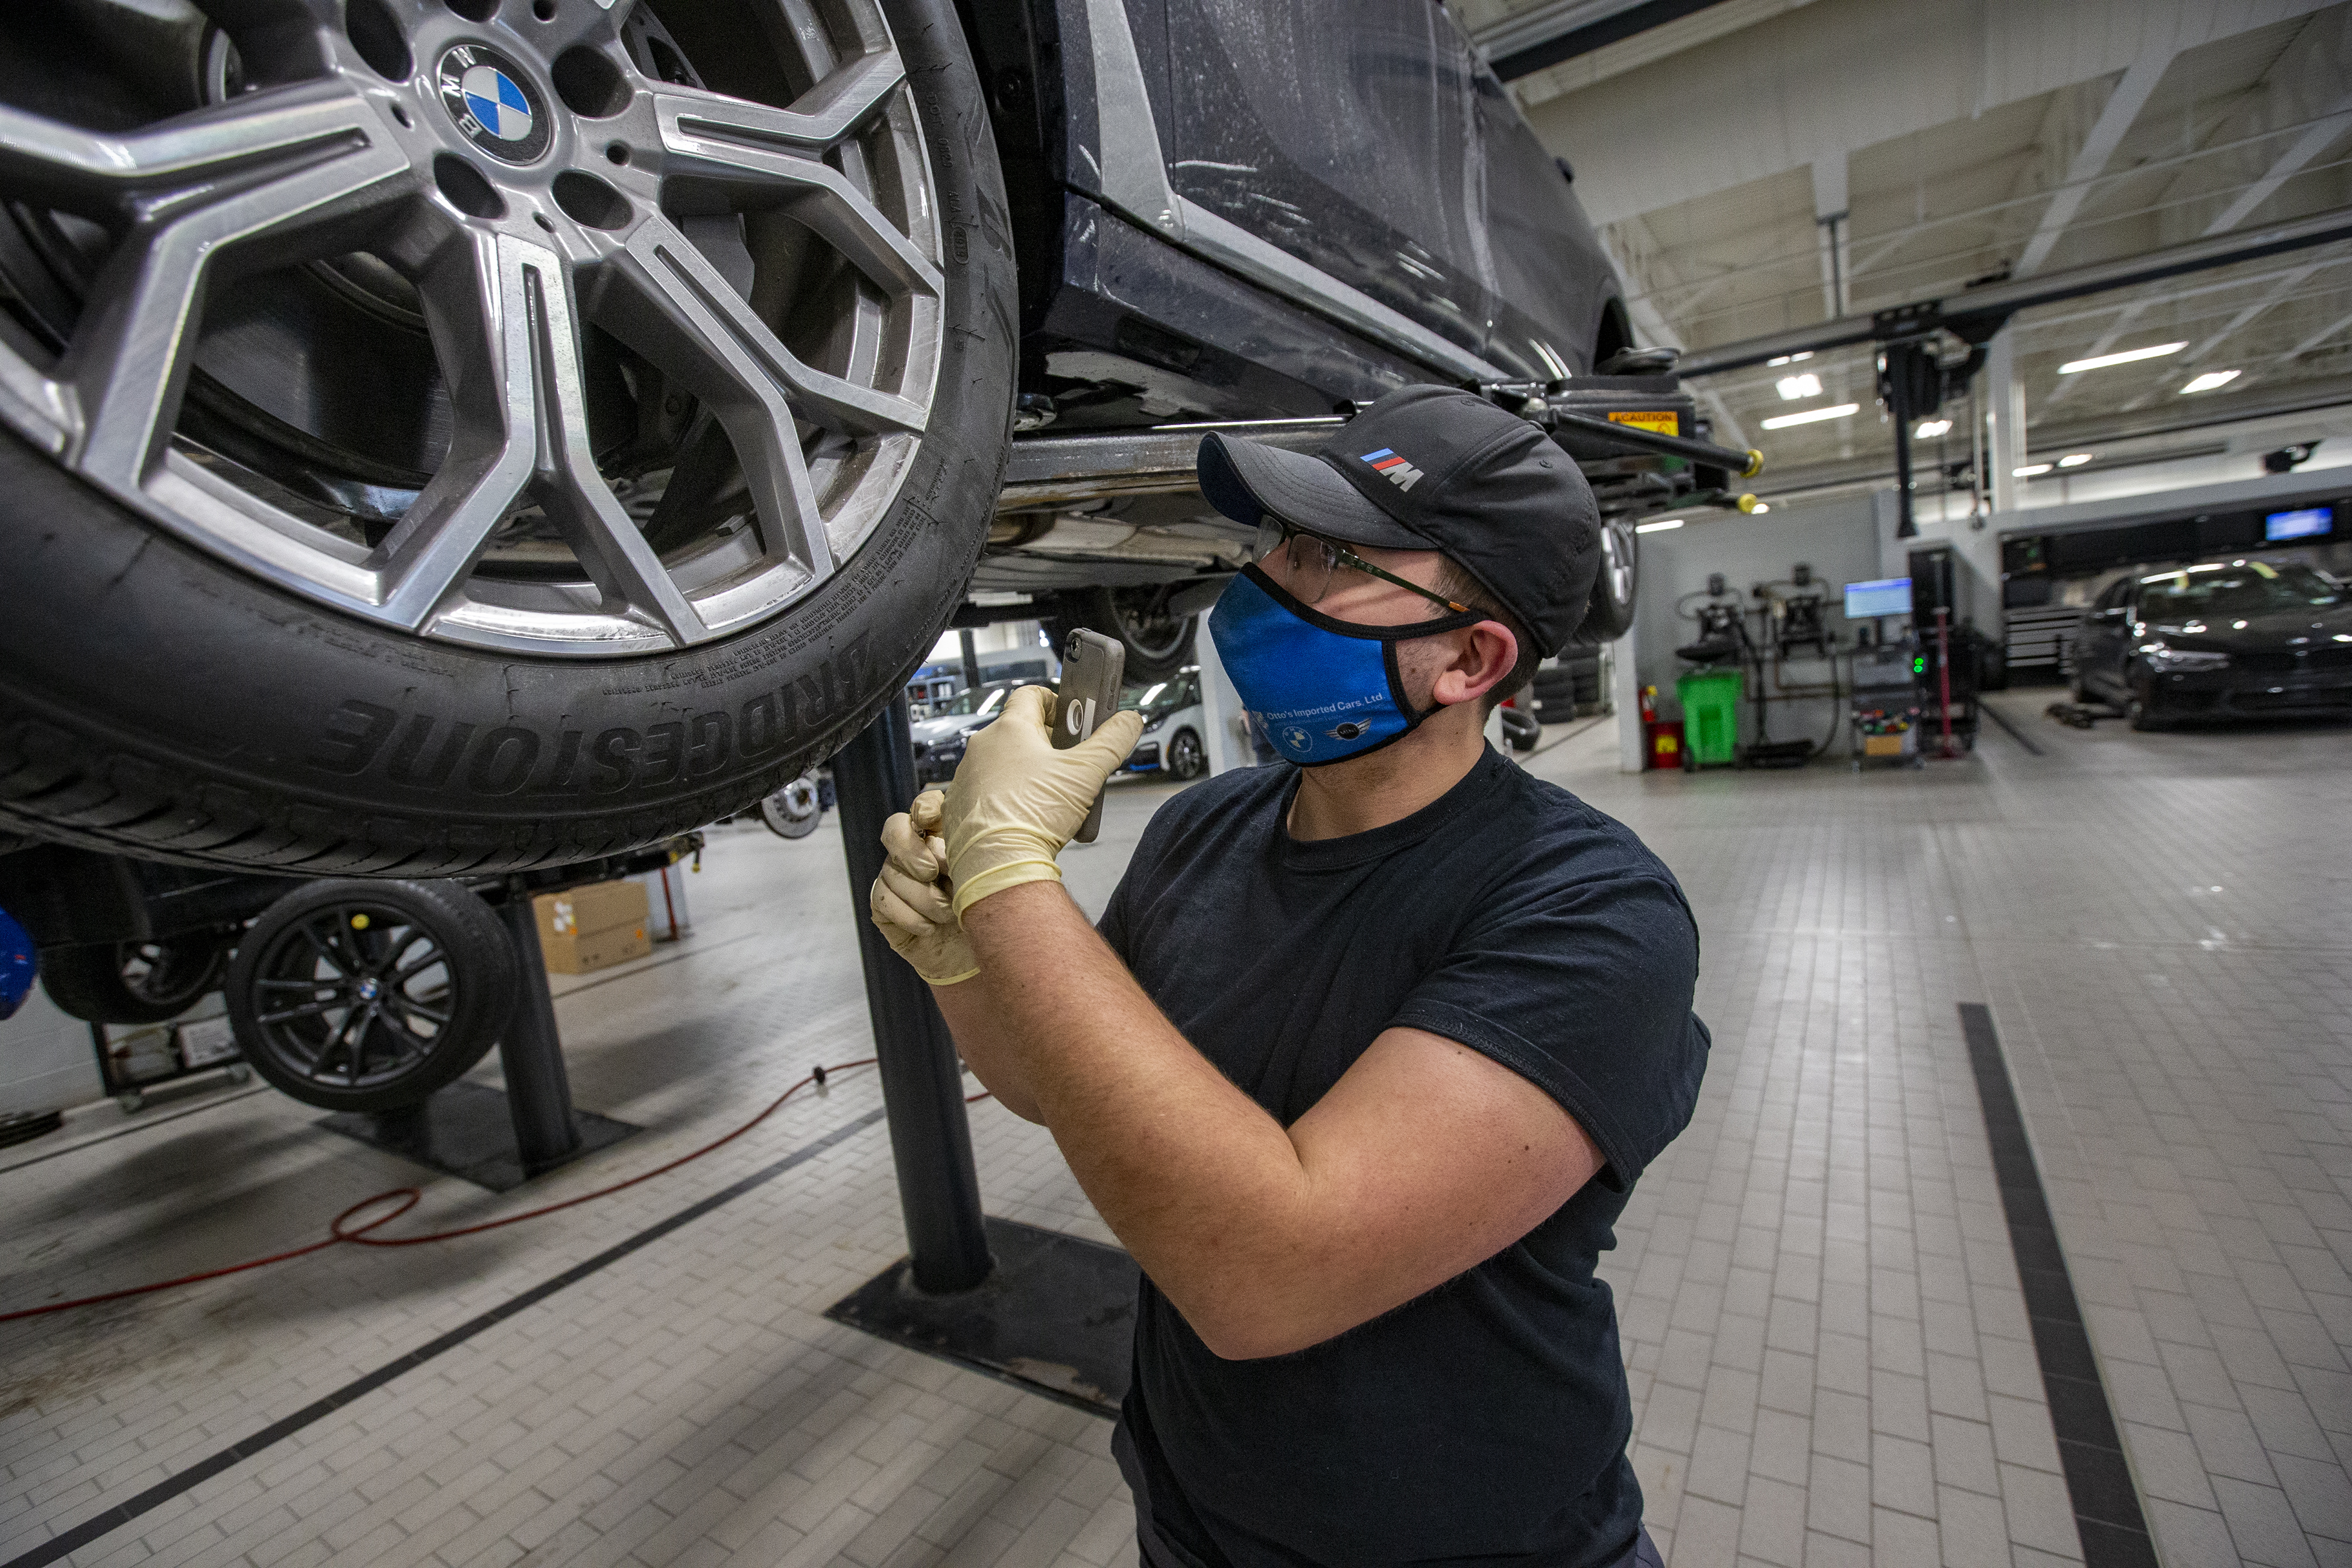 As auto repair goes high tech, top technicians can earn over $20K